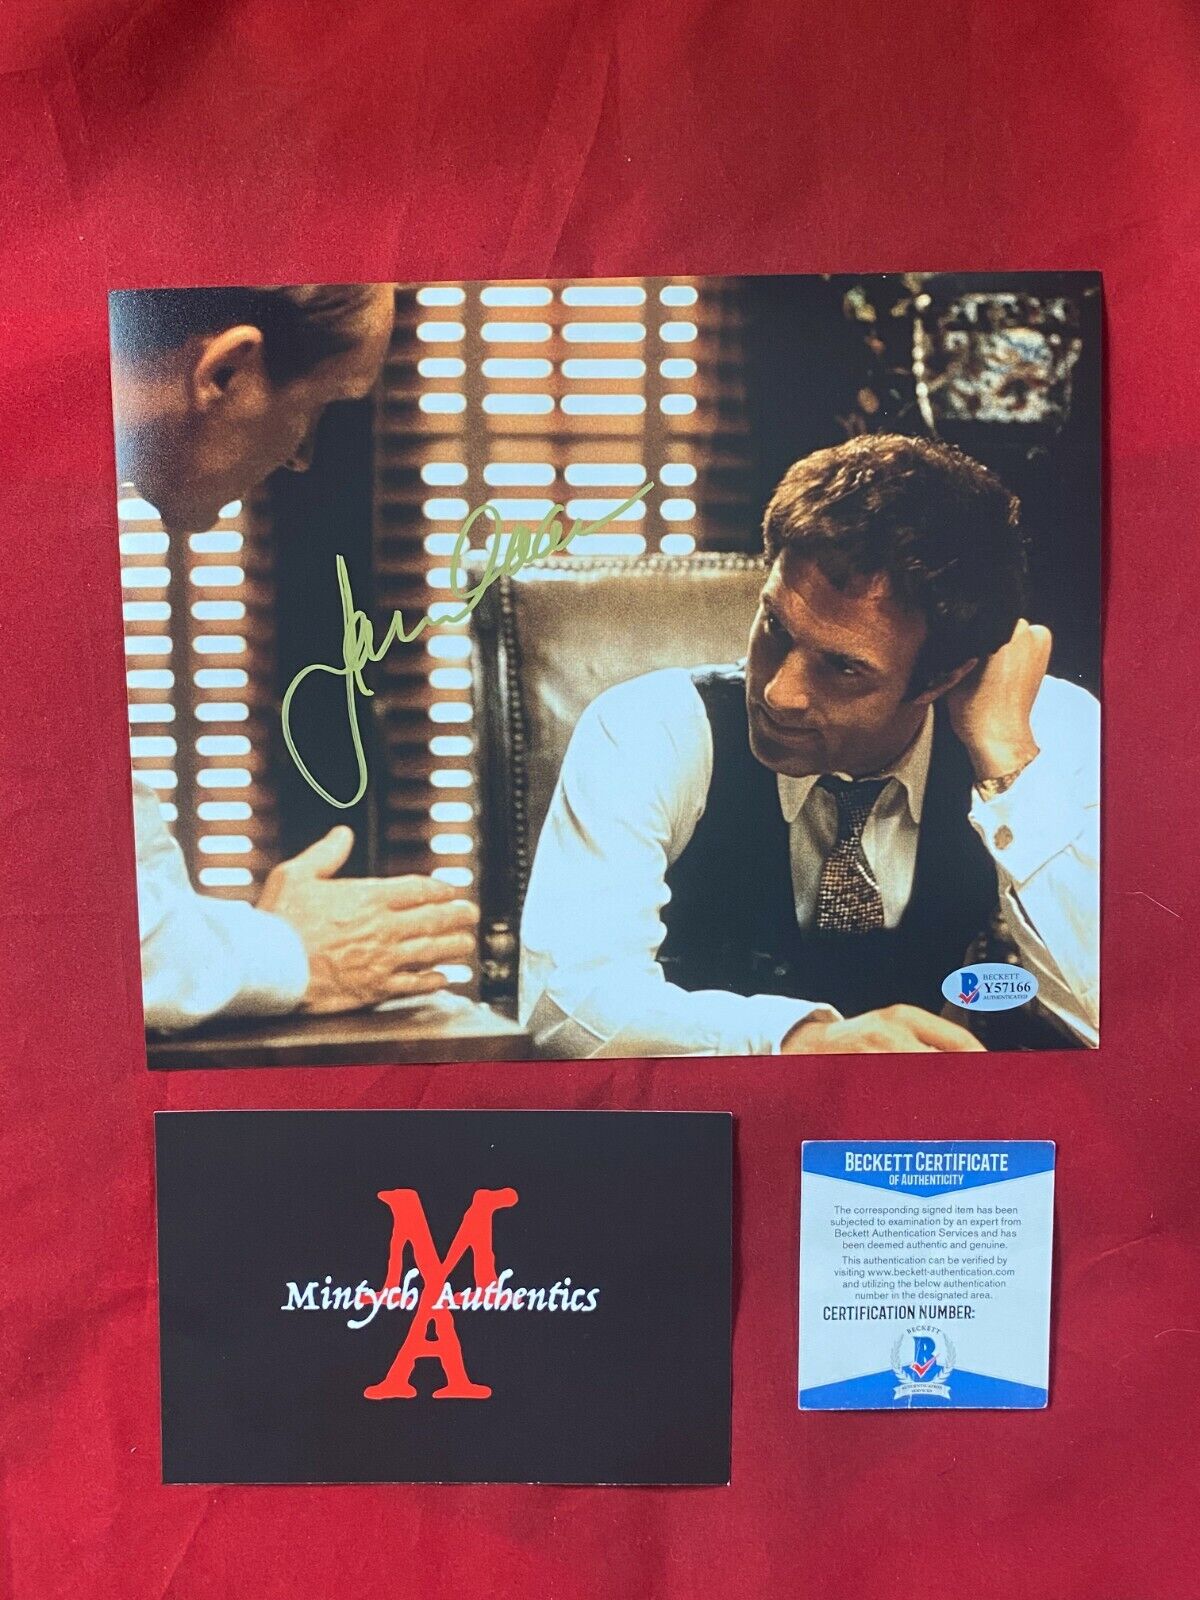 JAMES CAAN AUTOGRAPHED SIGNED 8x10 Photo Poster painting! THE GODFATHER! BECKETT COA! SONNY!